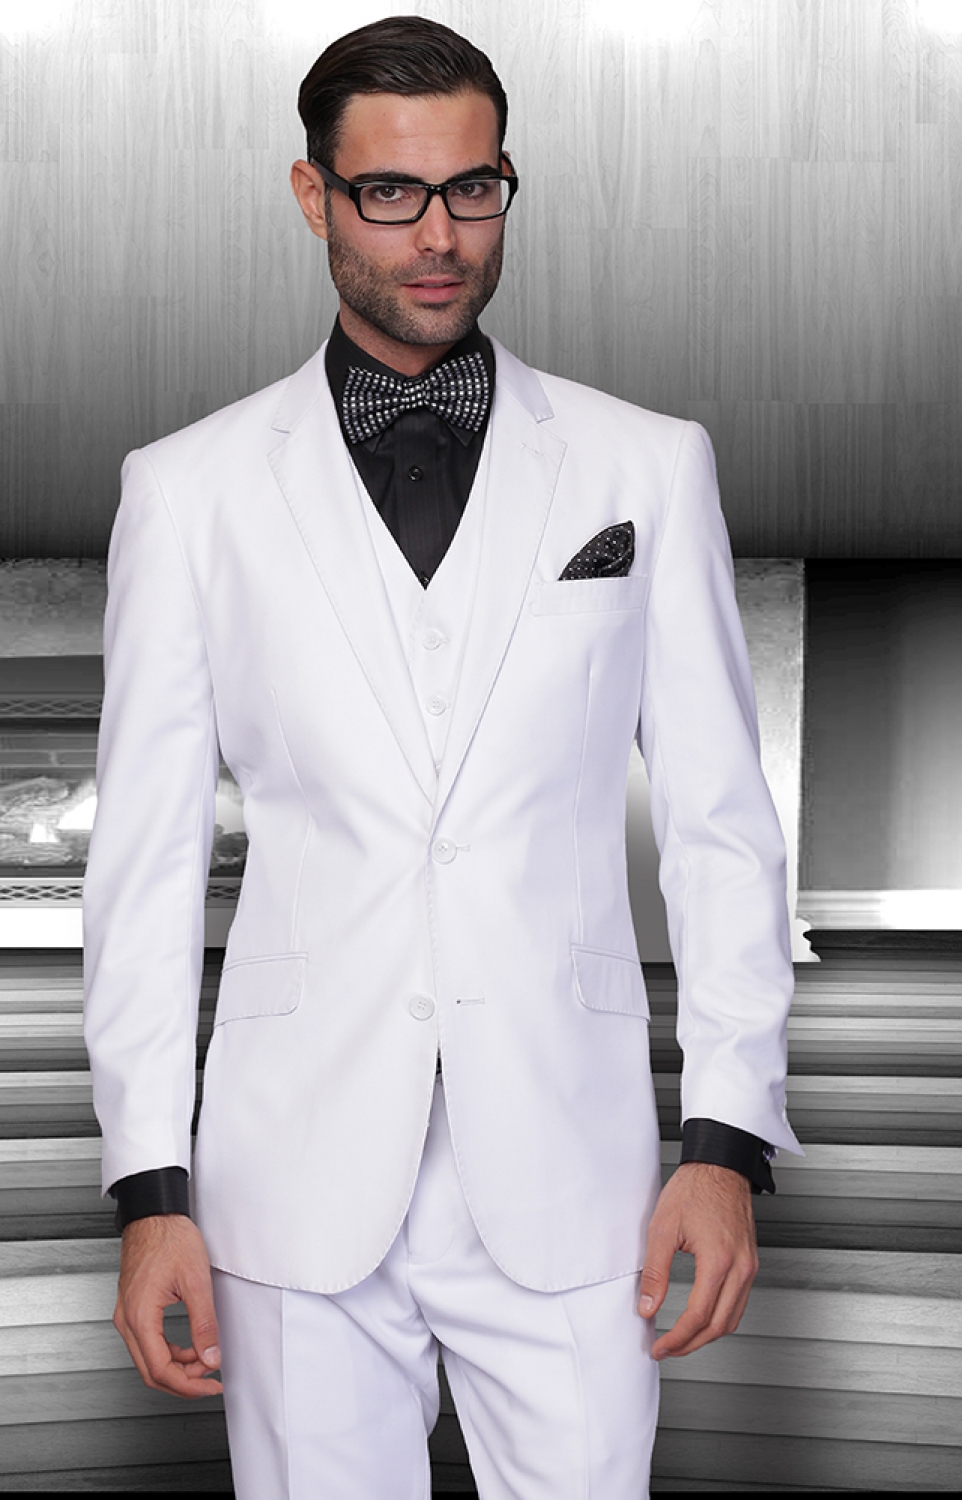 TZ-100 CLASSIC REGULAR FIT PLEATED PANTS 3PC 2 BUTTON SOLID WHITE MENS SUIT BY STATEMENT. SUPER 150'S EXTRA FINE ITALIAN